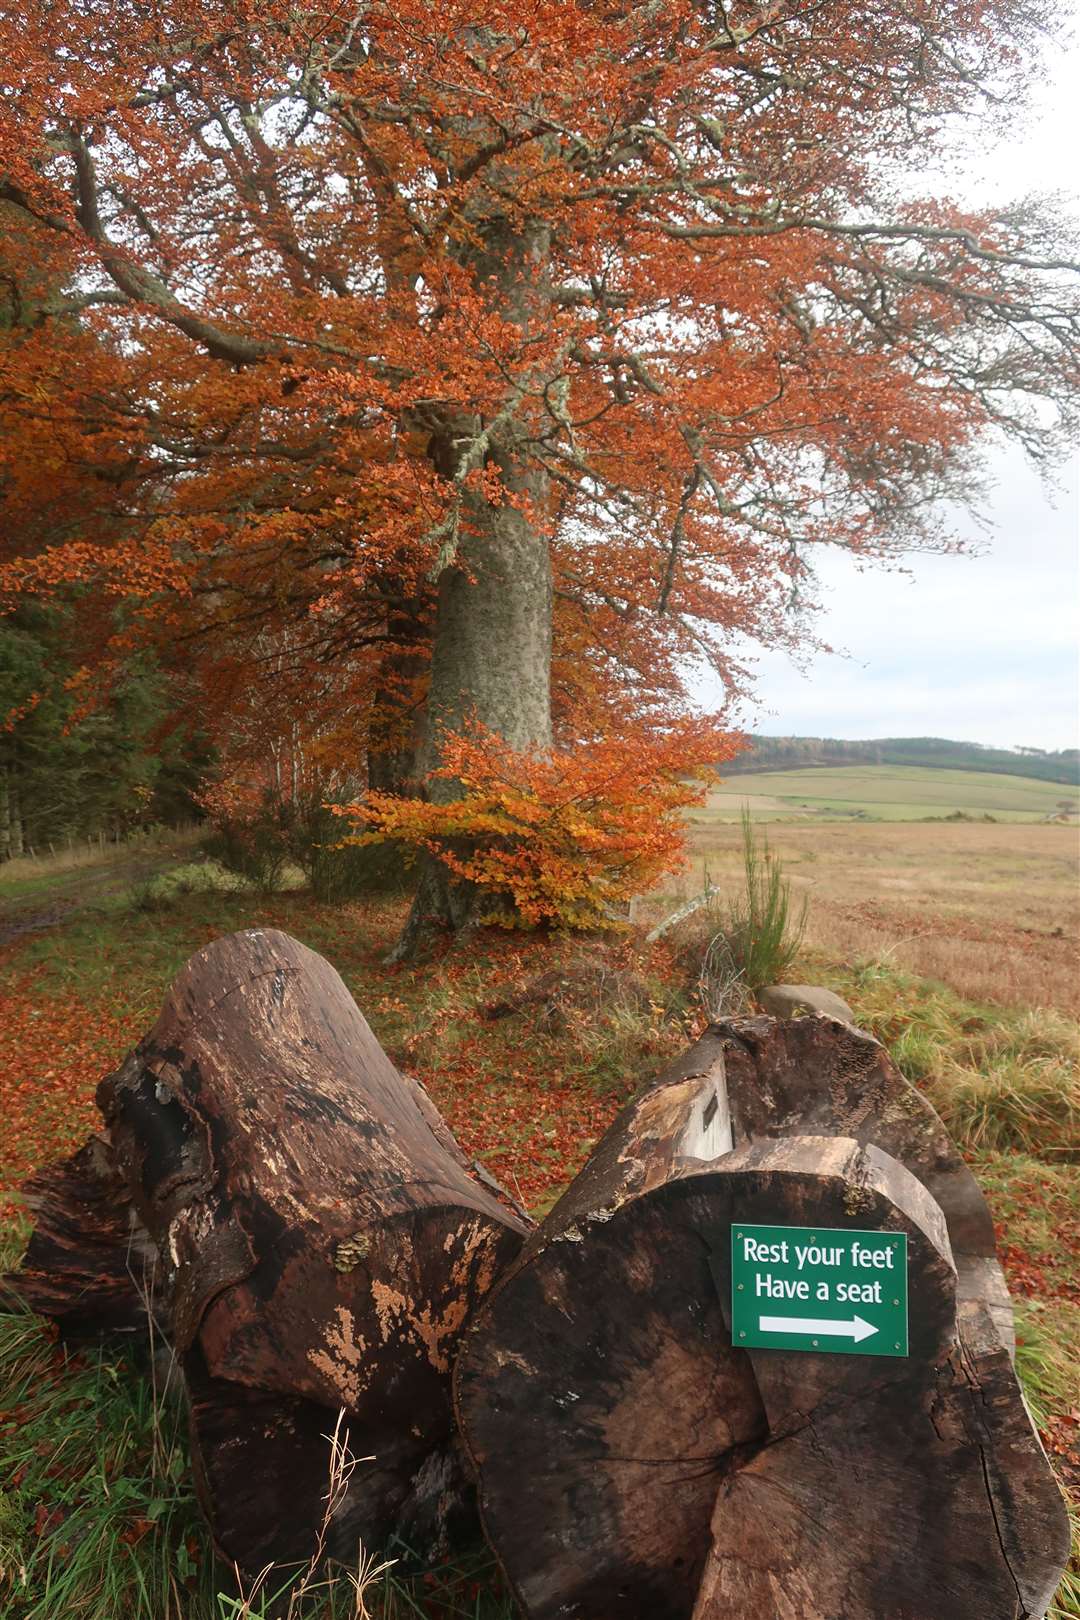 A welcoming sign at a seat cut out of an ancient felled tree trunk.